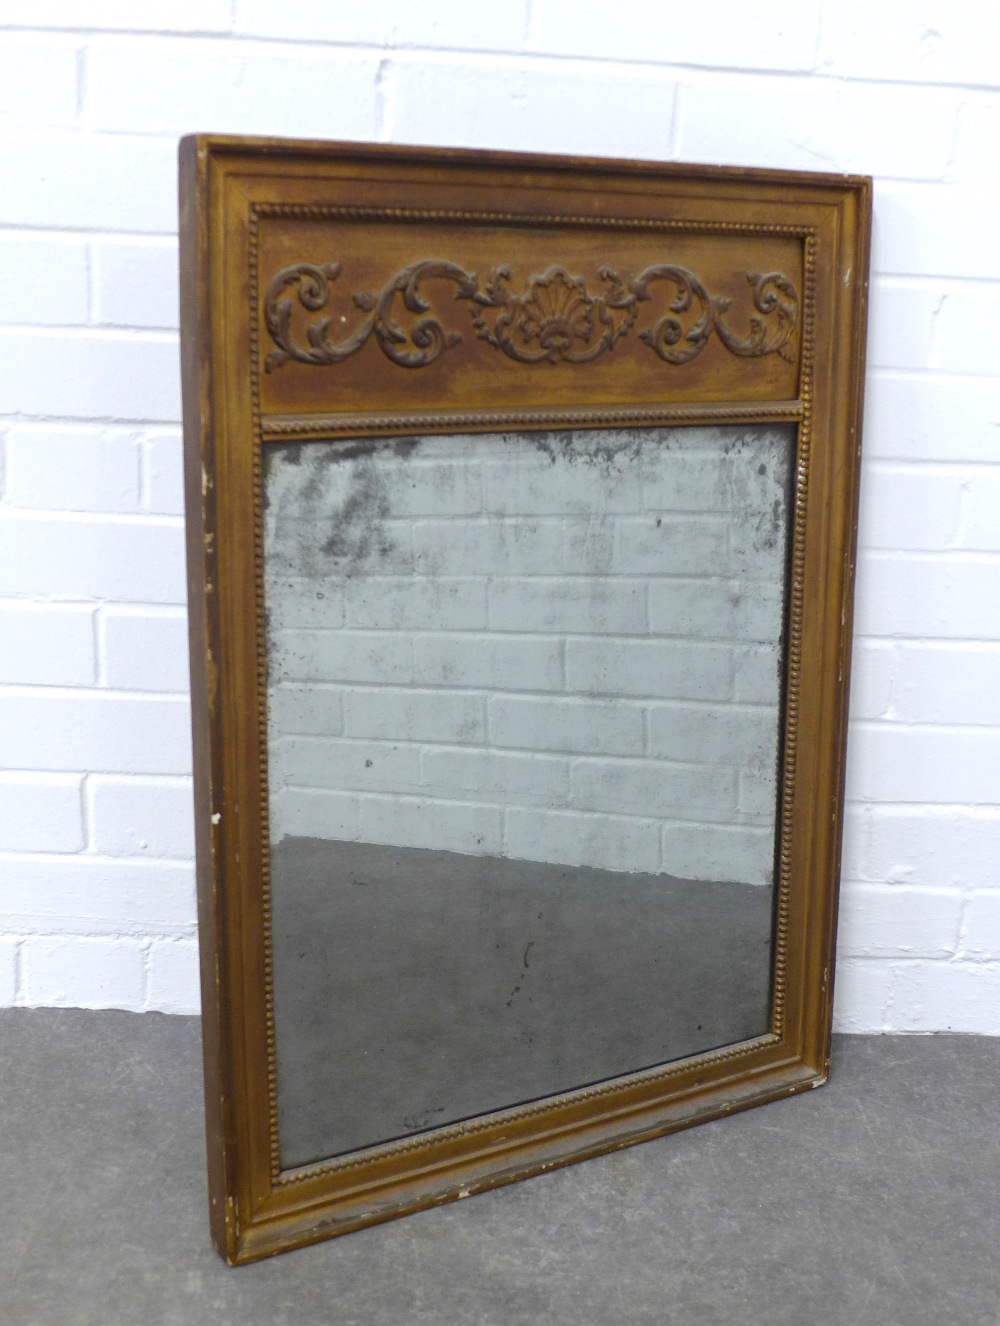 A classical style wall mirror with distressed mirror glass plate 55 x 70cm.